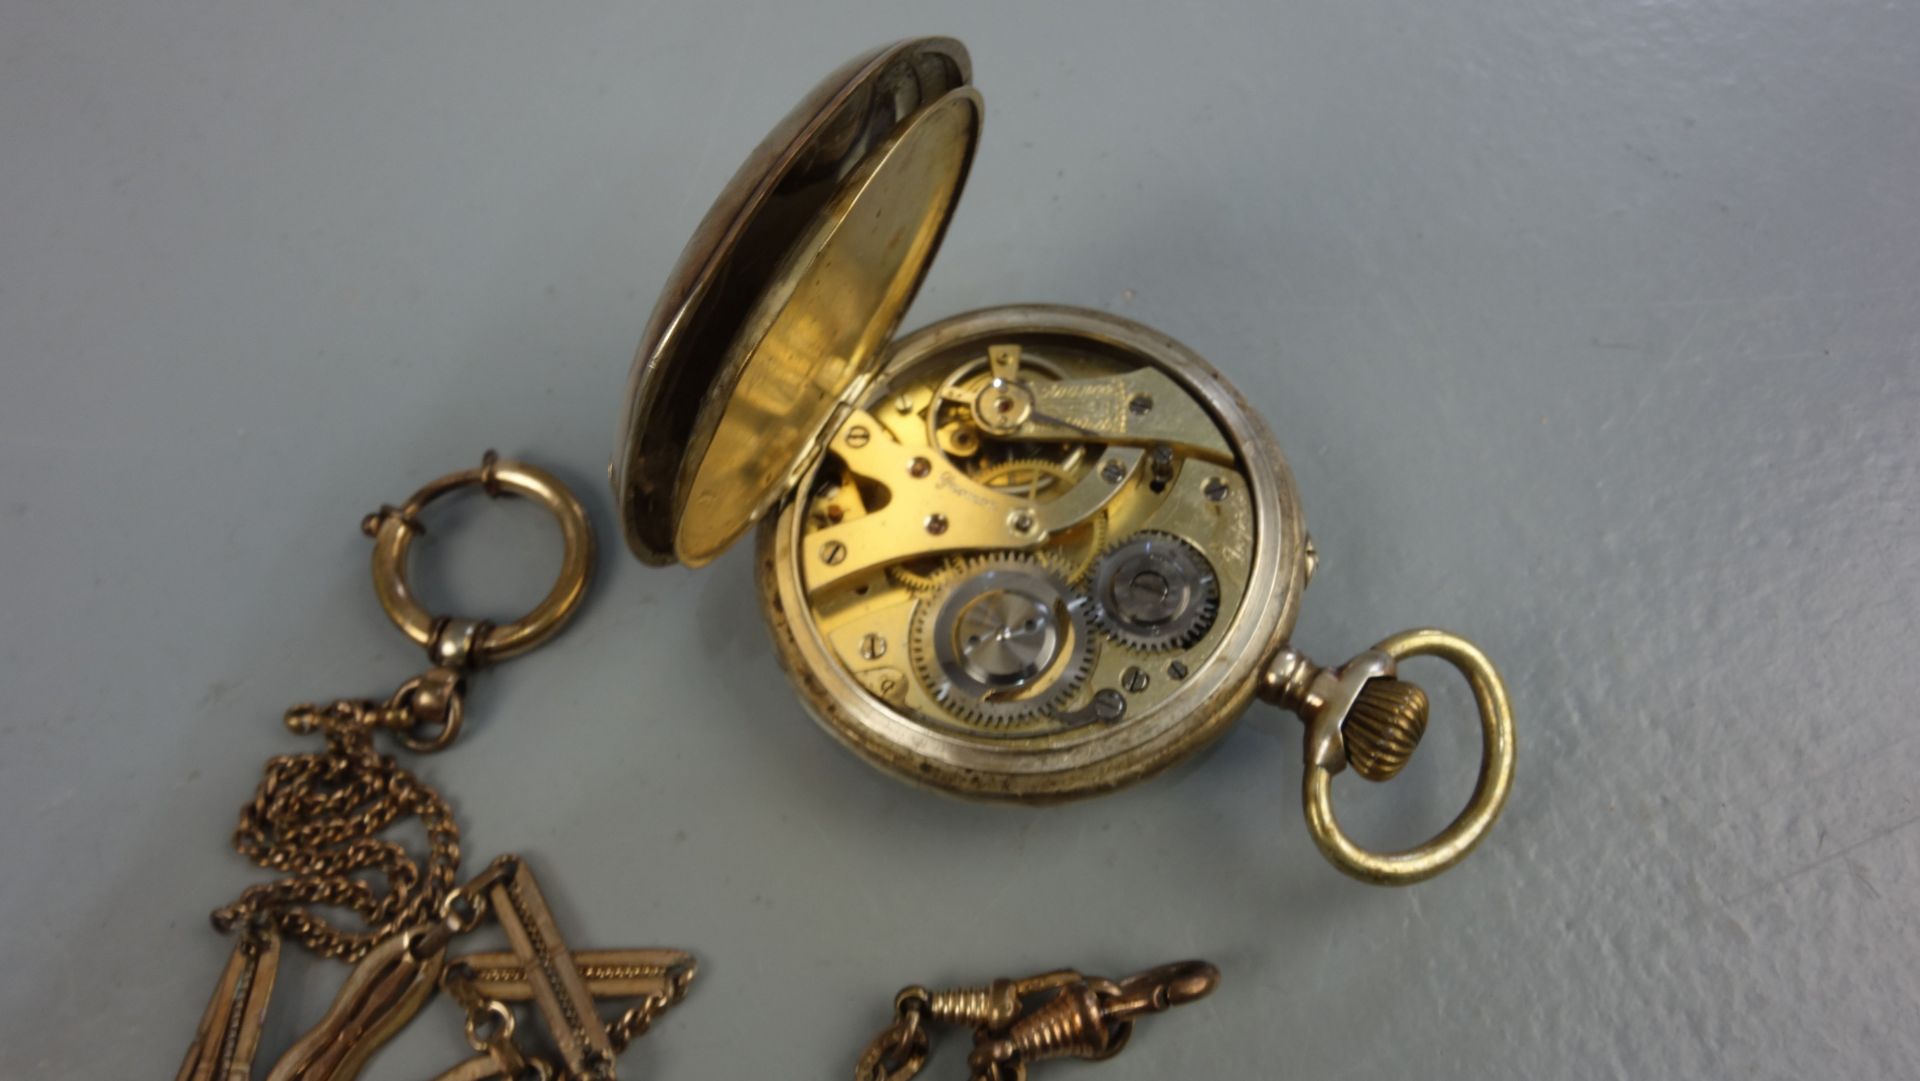 SILVER POCKET WATCH WITH POCKET WATCH CHAIN - Image 2 of 3